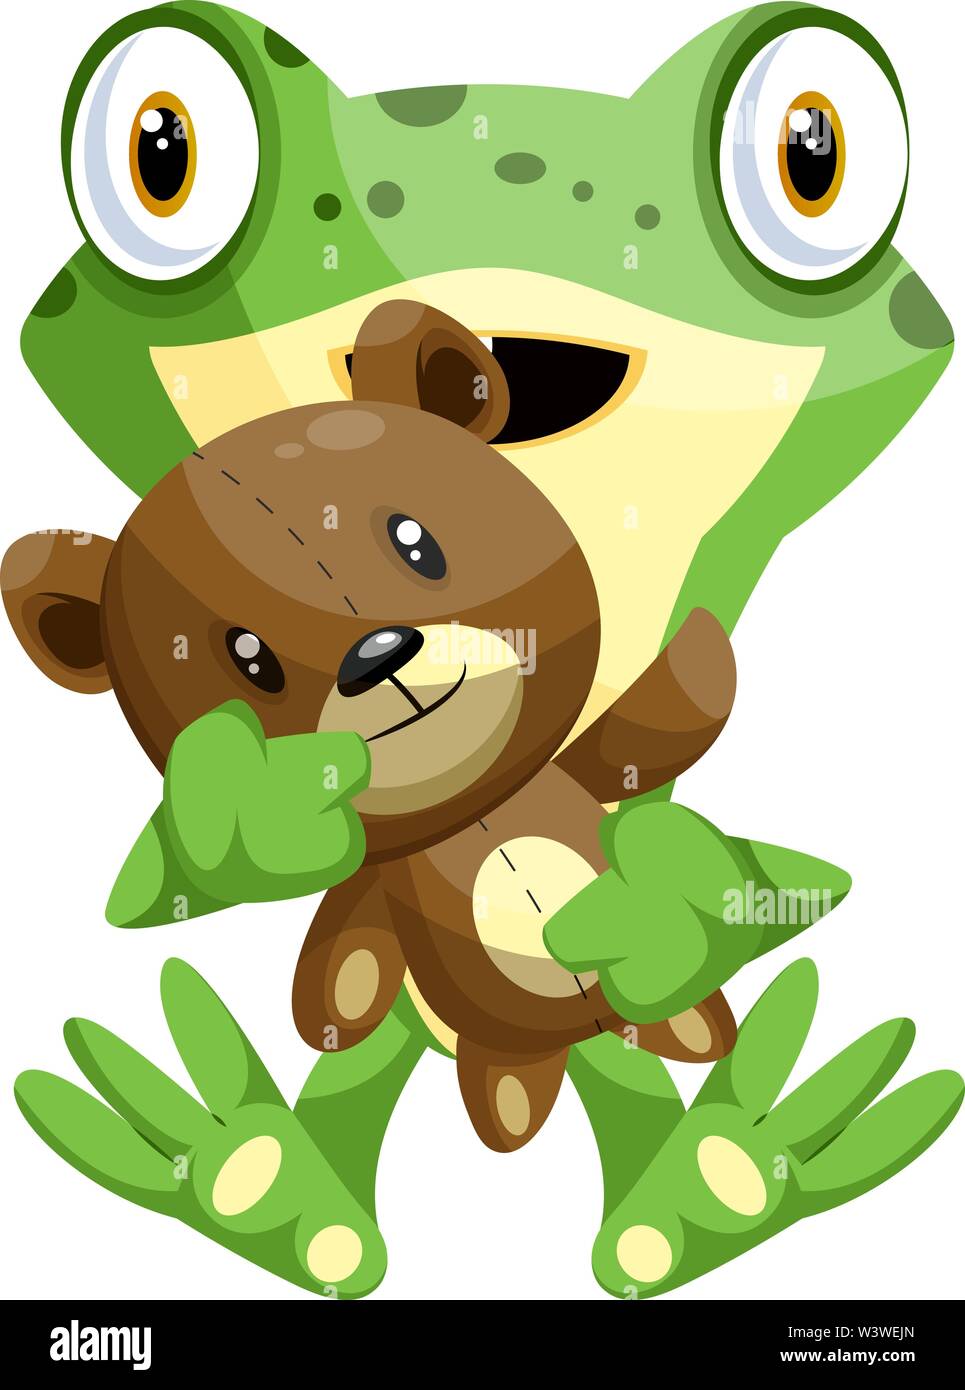 Green frog holding a teddy bear, illustration, vector on white background. Stock Vector